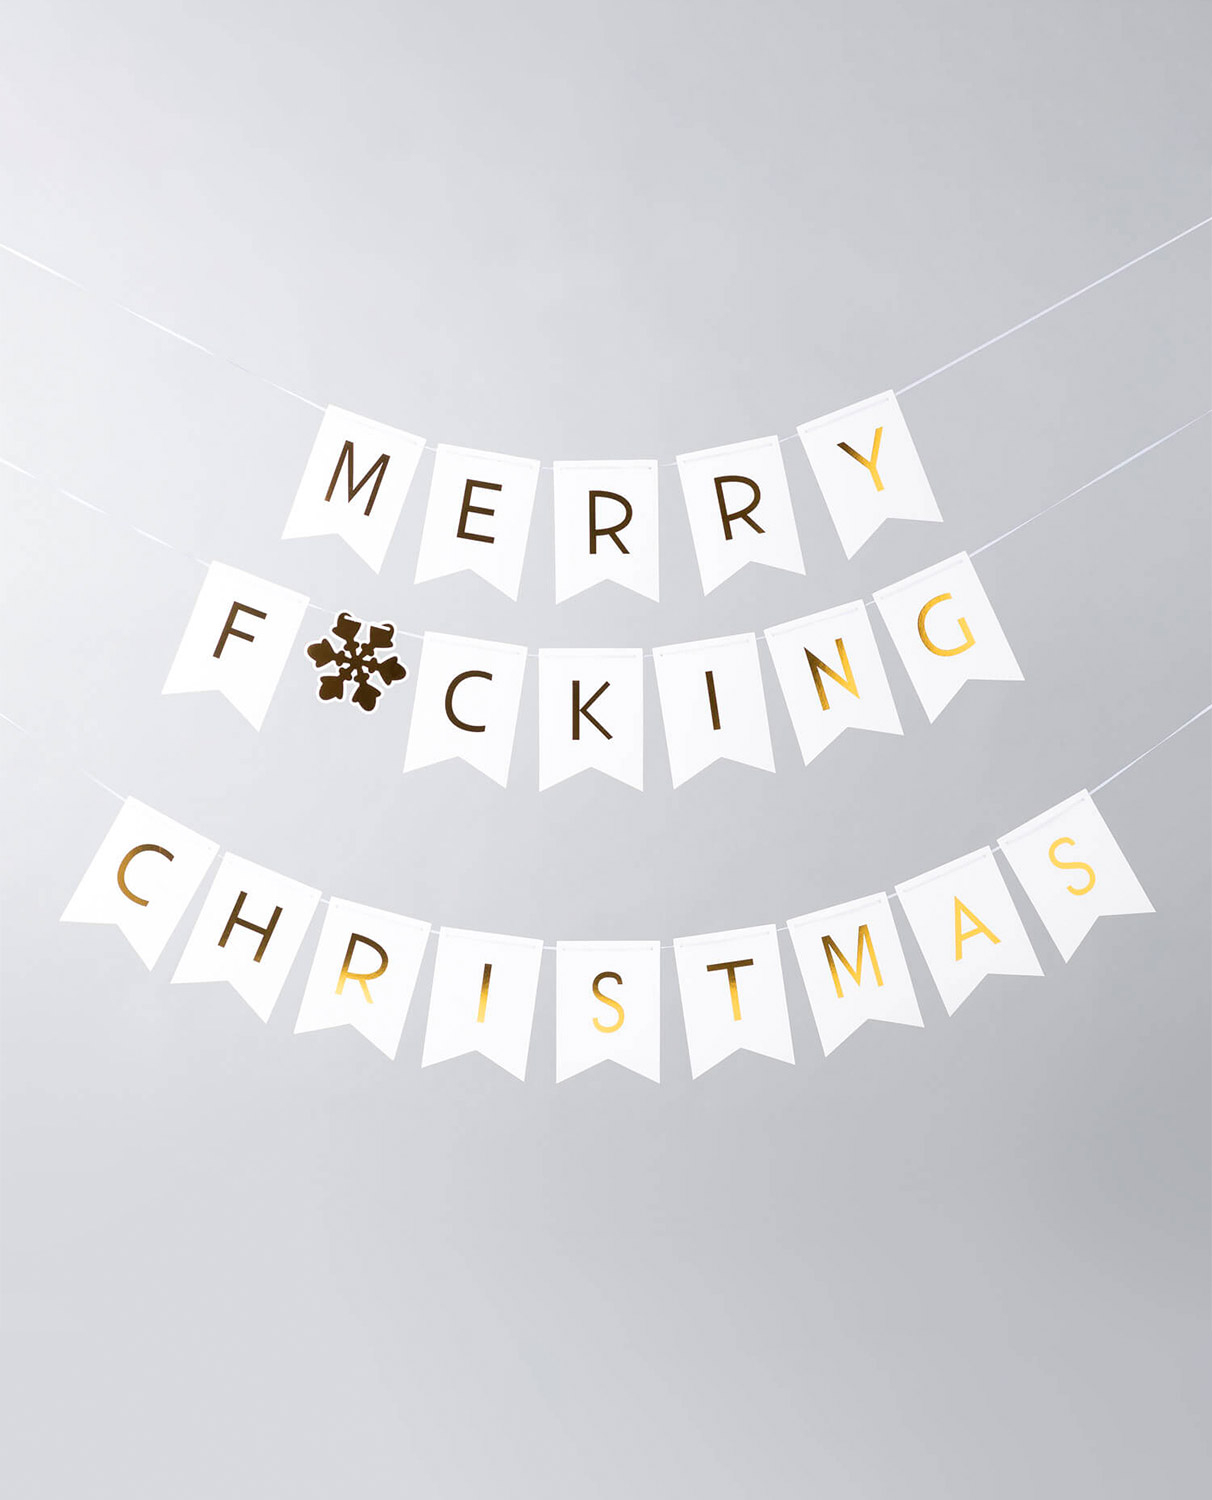 Merry Christmas Letters Decoration, gallery image 1